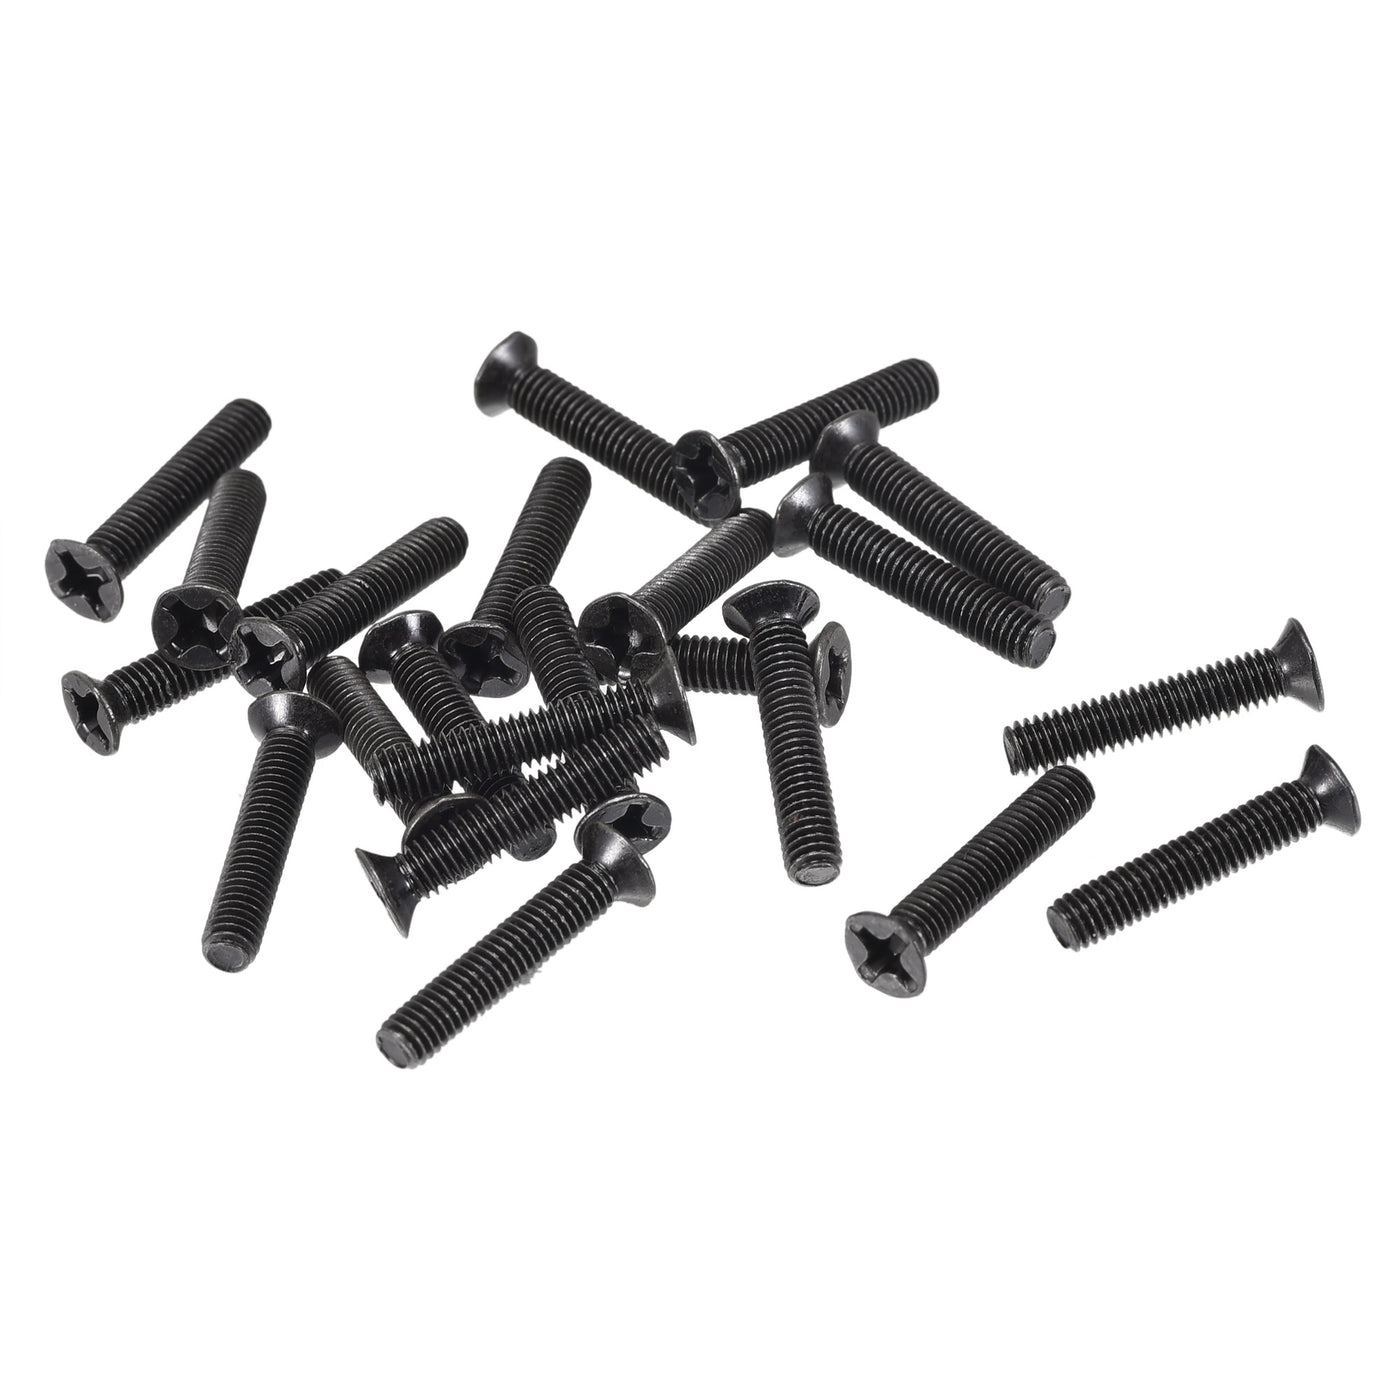 uxcell Uxcell M3 x 16mm Phillips Flat Head Screws Carbon Steel Machine Screws Black for Home Office Computer Case Appliance Equipment 150pcs